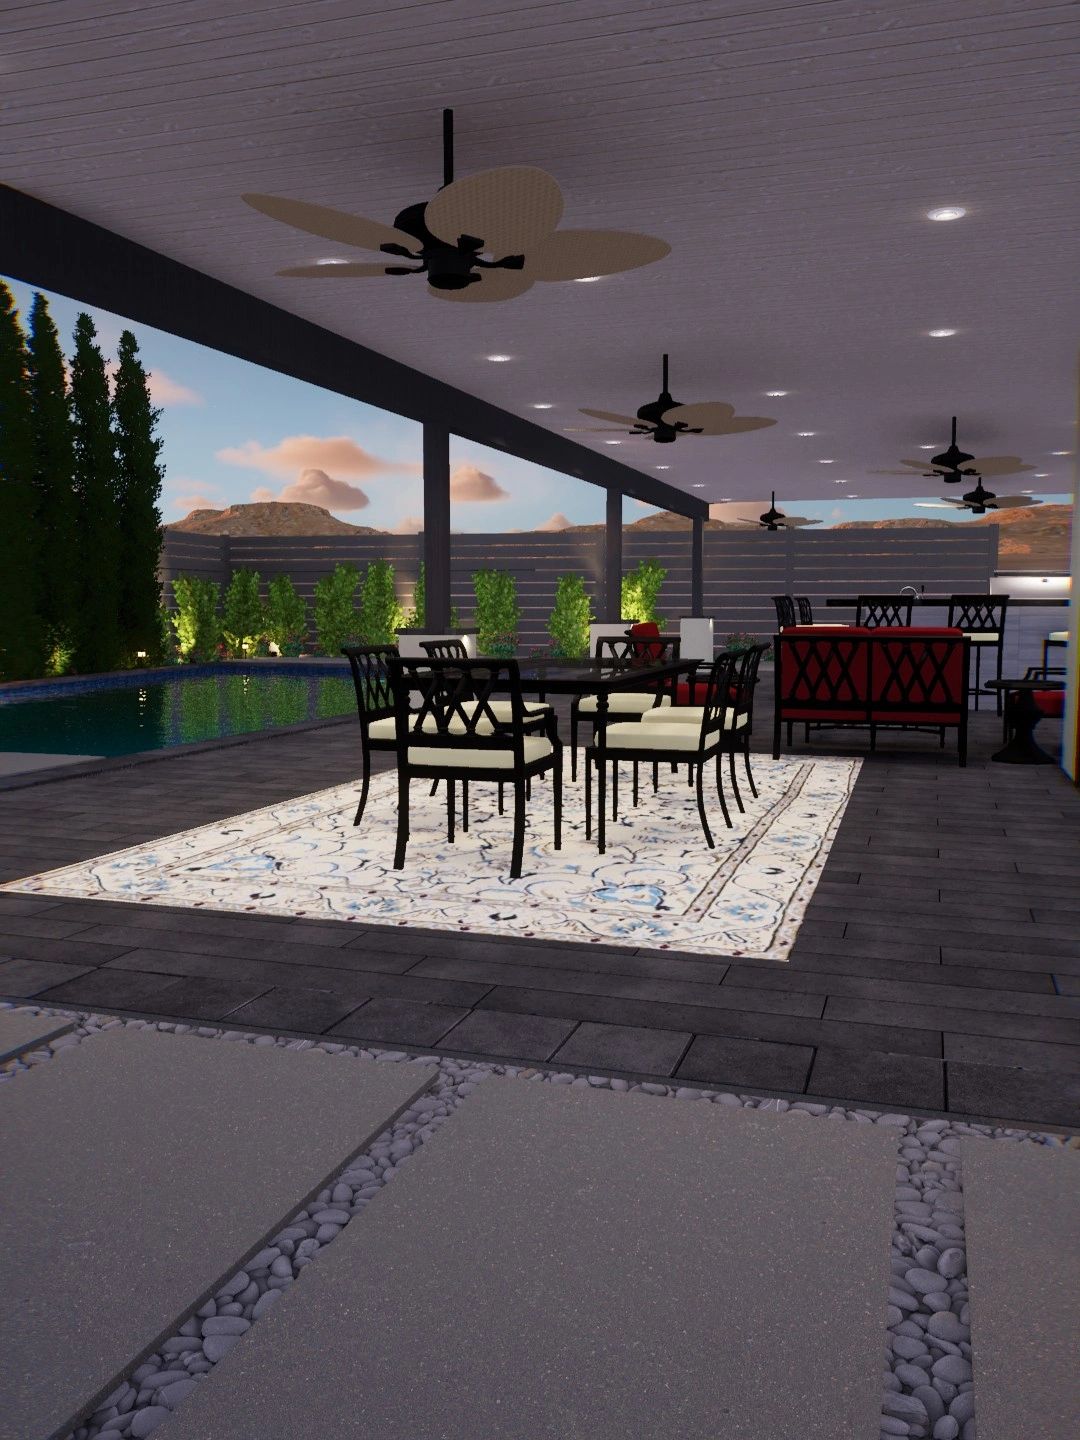 Outdoor dining area with solid patio cover.